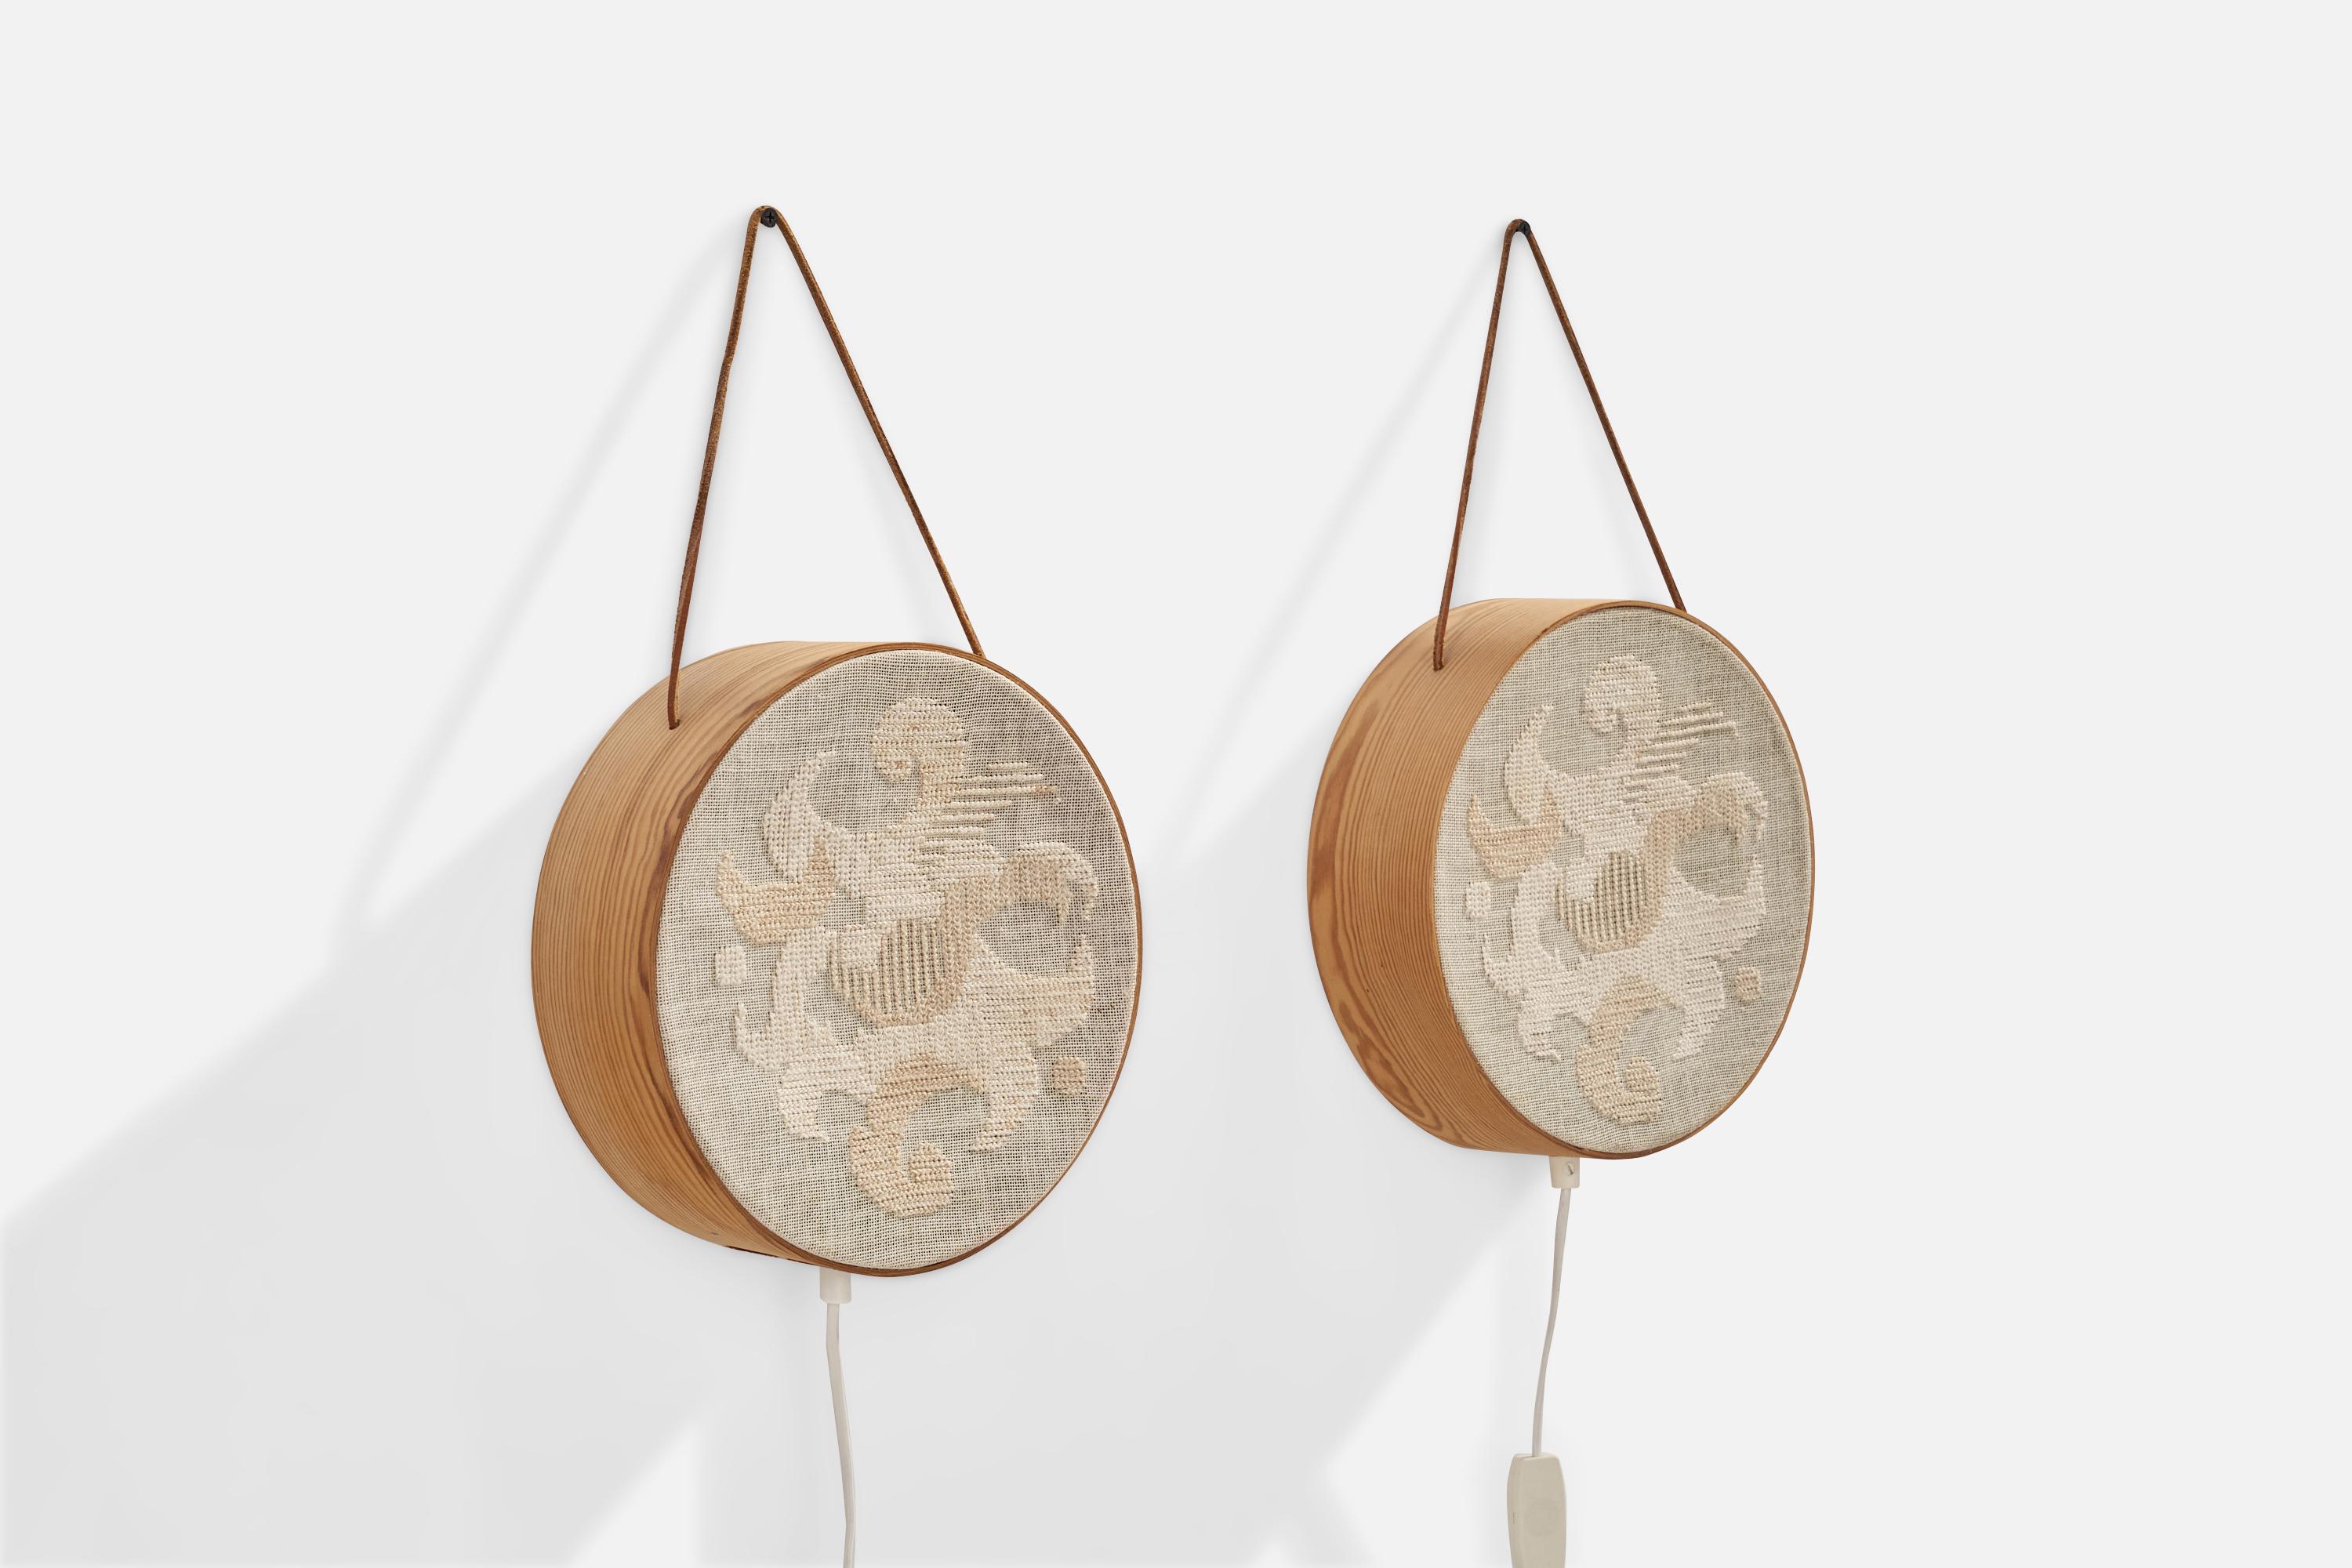 A pair of pine, leather and beige embroidery fabric wall lights designed and produced in Sweden, 1970s.

Overall Dimensions (inches): 3.25”  H x 10” D
Back Plate Dimensions (inches): N/A
Bulb Specifications: E-14 Bulb
Number of Sockets: 2
All